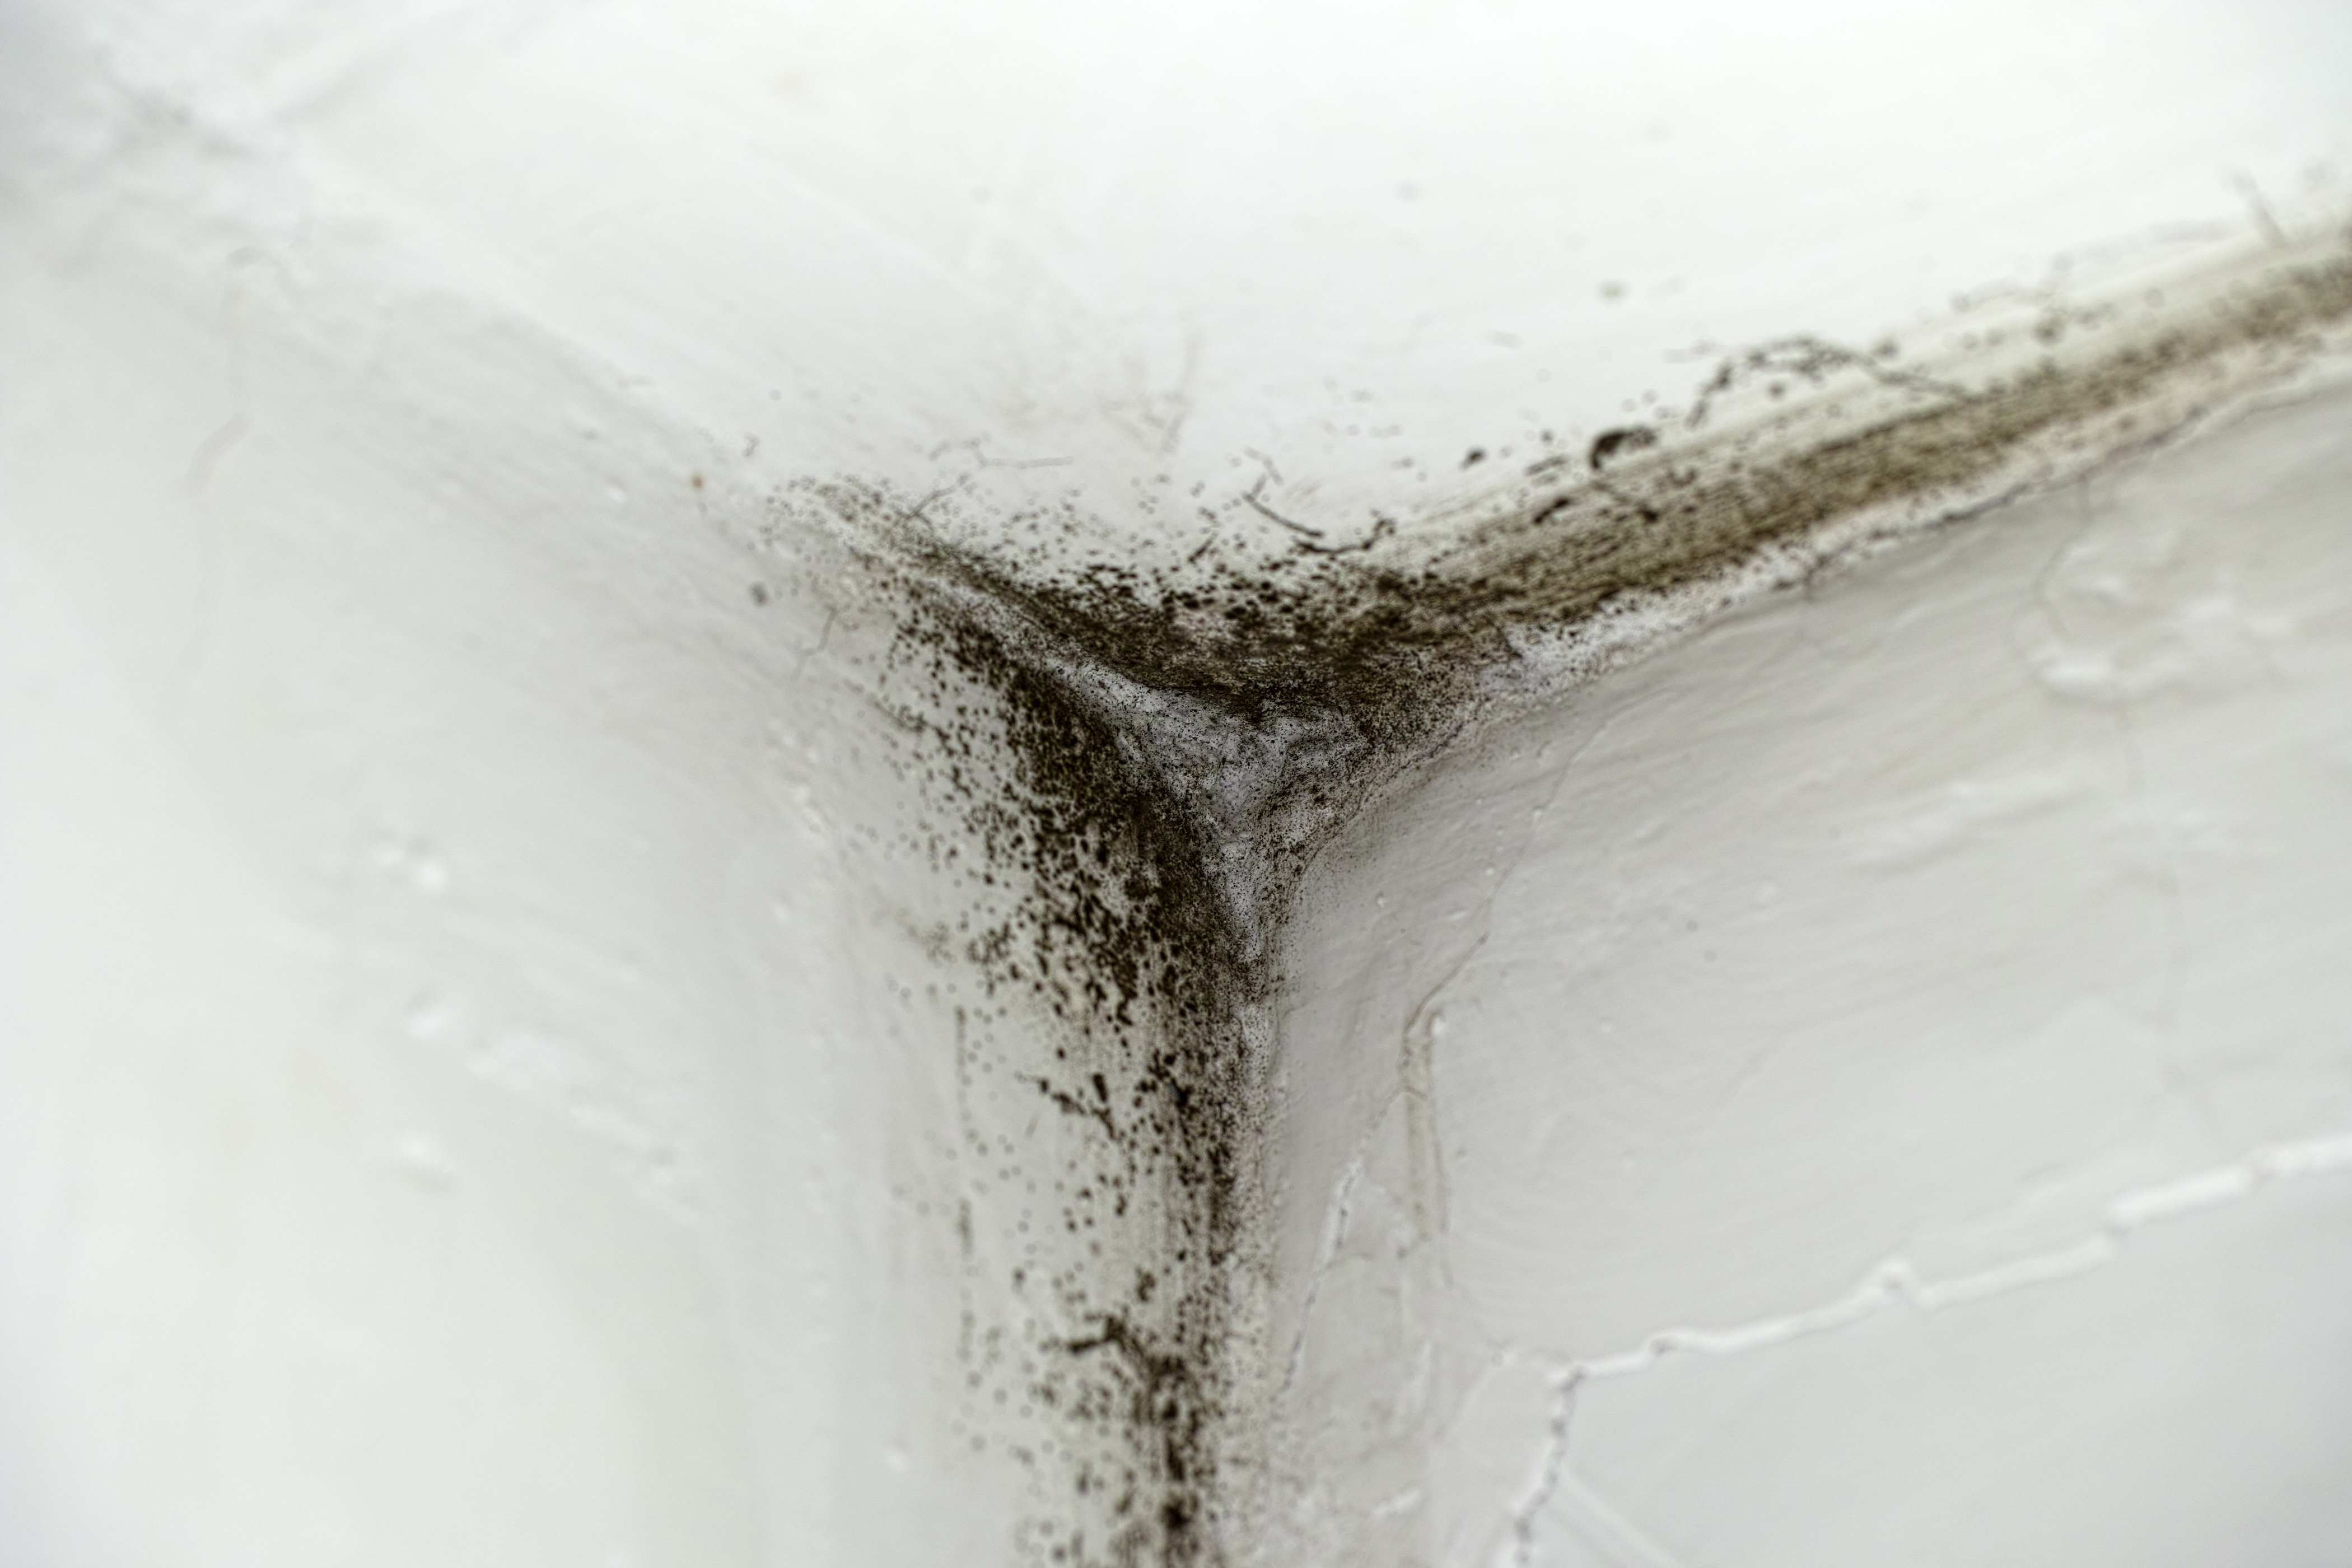 Black Mold - Stachybotrys  Where is it found and what to do